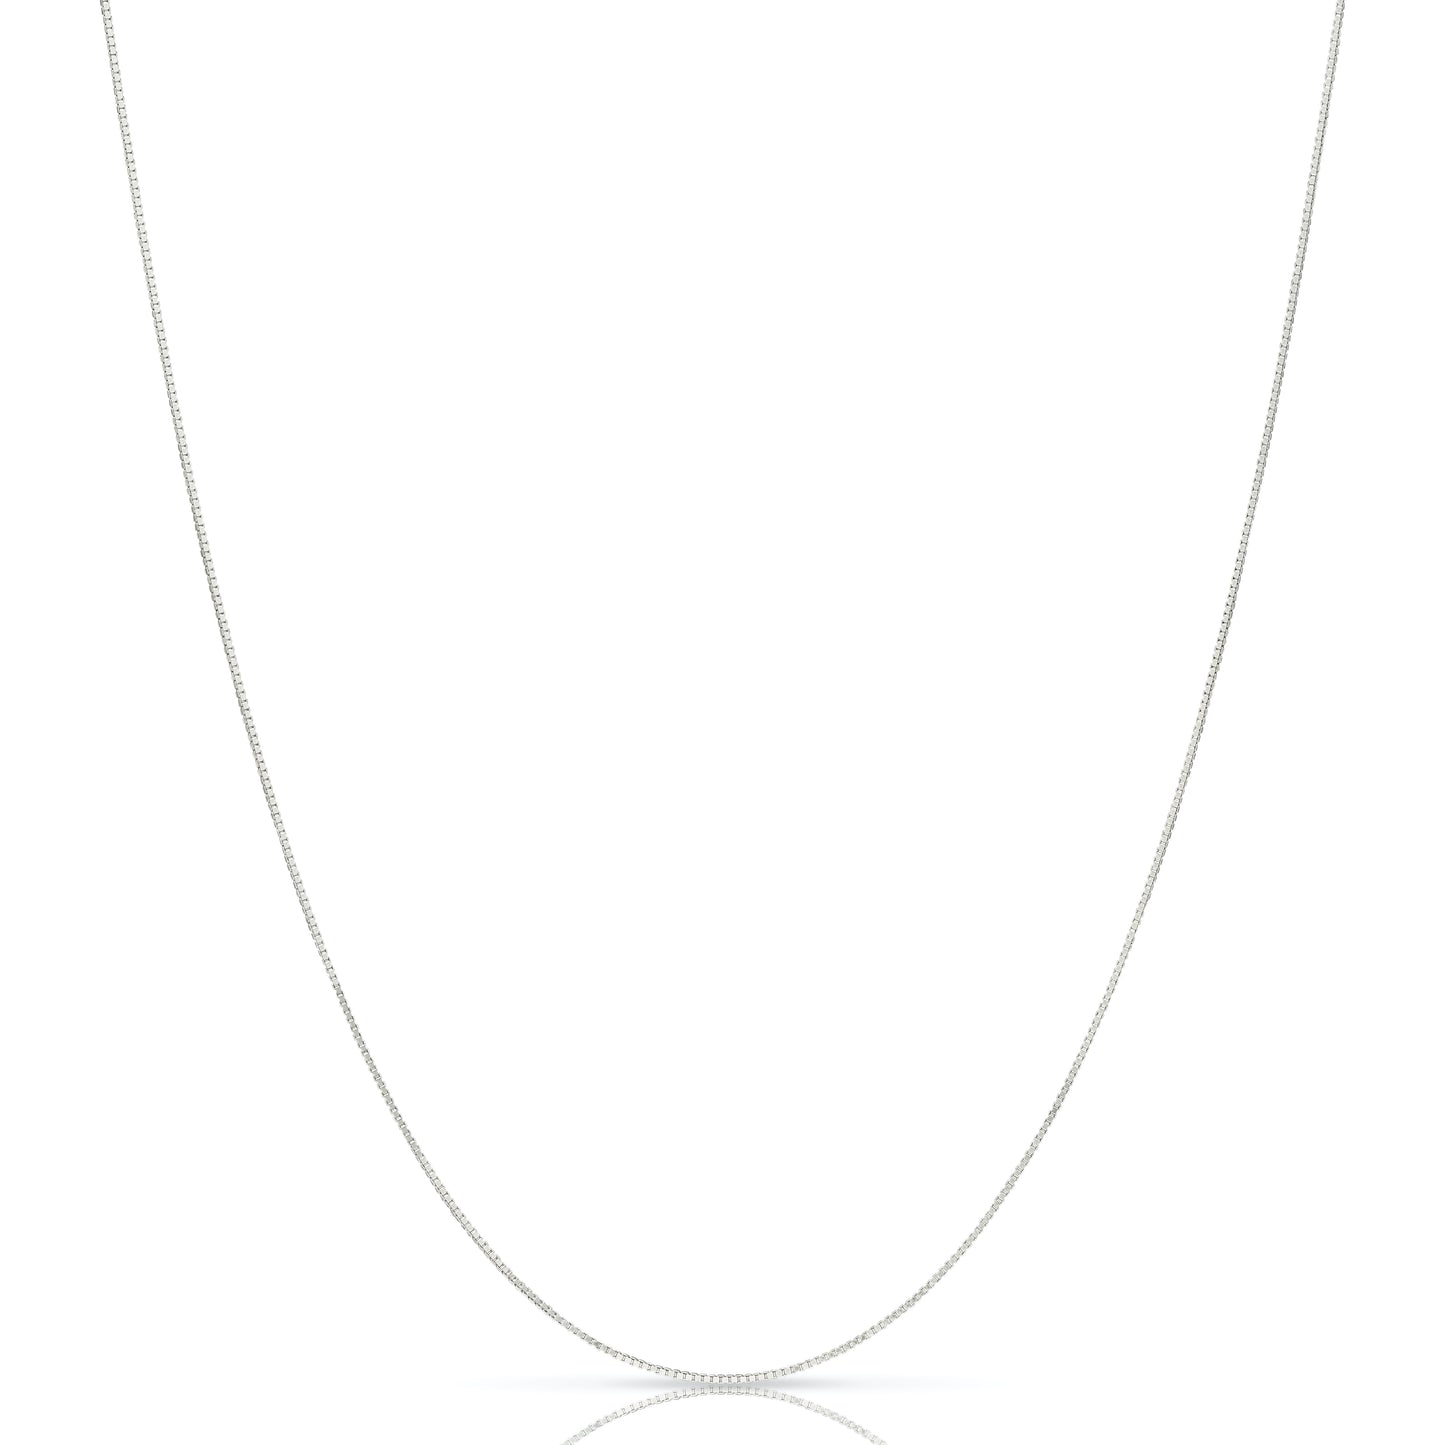 Sterling Silver Box Chain Necklace 1MM-3MM, Solid 925 Italy